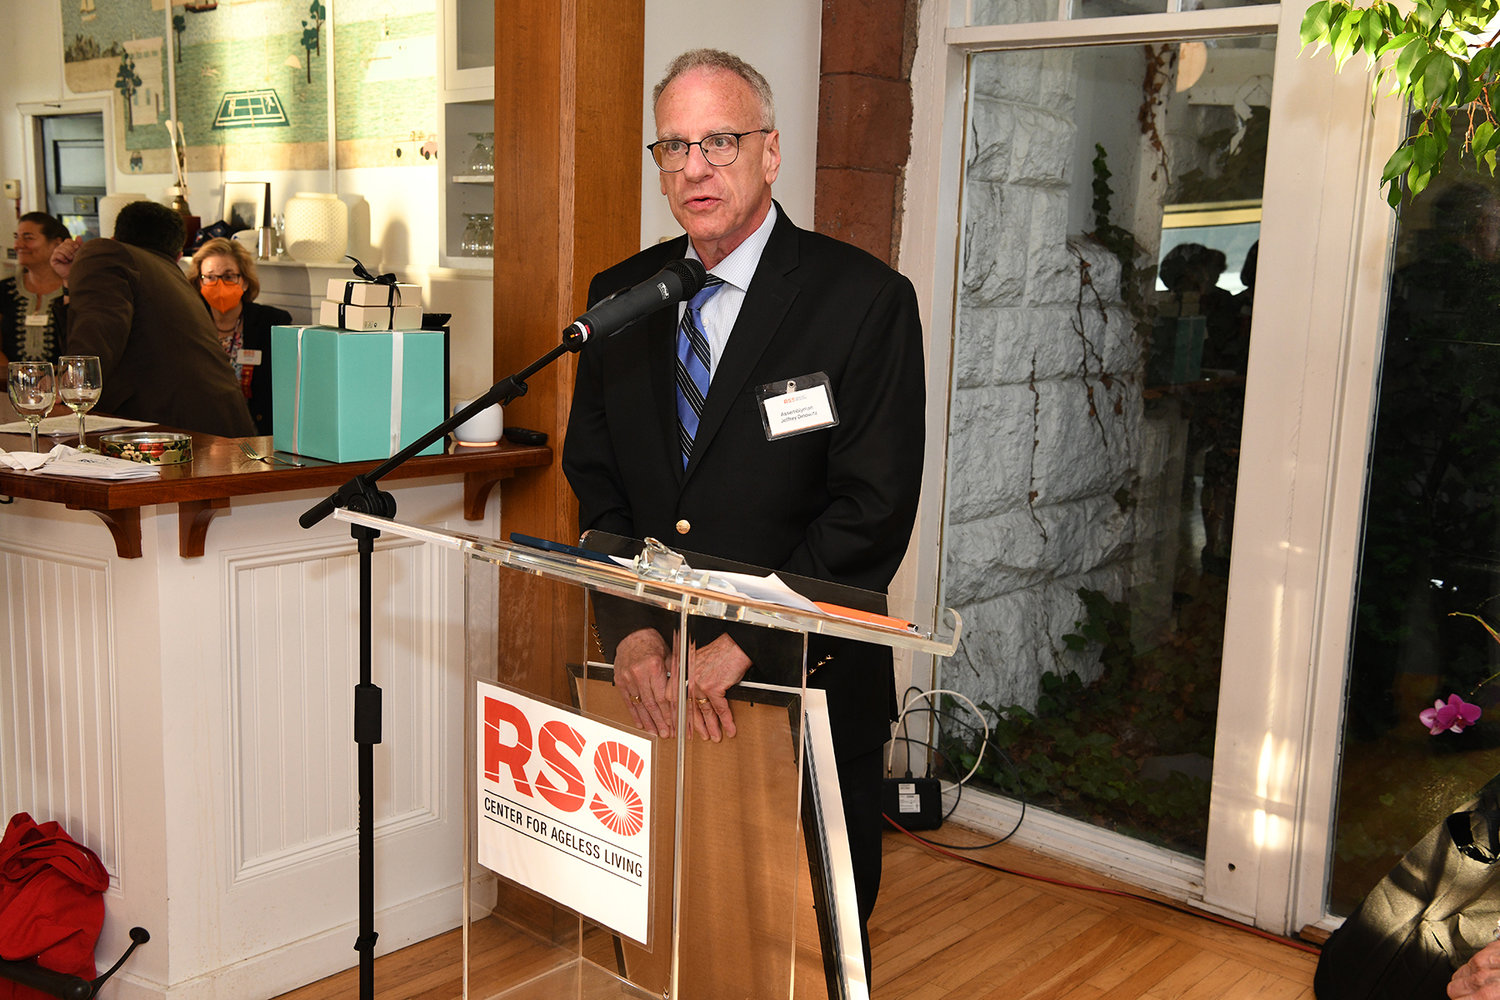 Assemblyman Jeffrey Dinowitz fetes Horace Mann School head of school Thomas Kelly Monday at the Riverdale Yacht Club at the RSS Center for Ageless Living 's annual meeting. He spearheded a $25,000 state legislative initiative to continue programs at RSS.